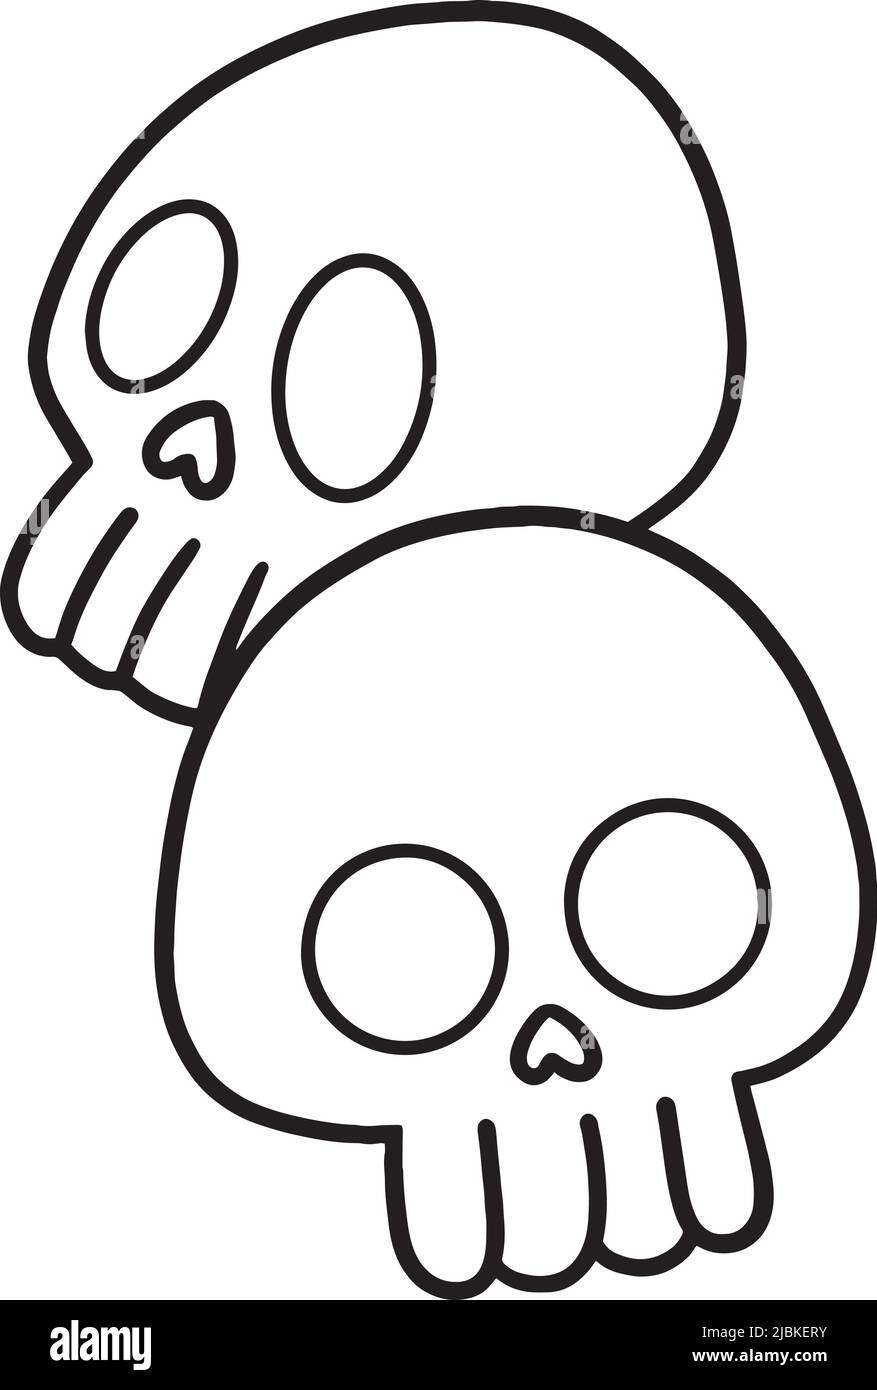 Skull halloween isolated coloring page for kids stock vector image art